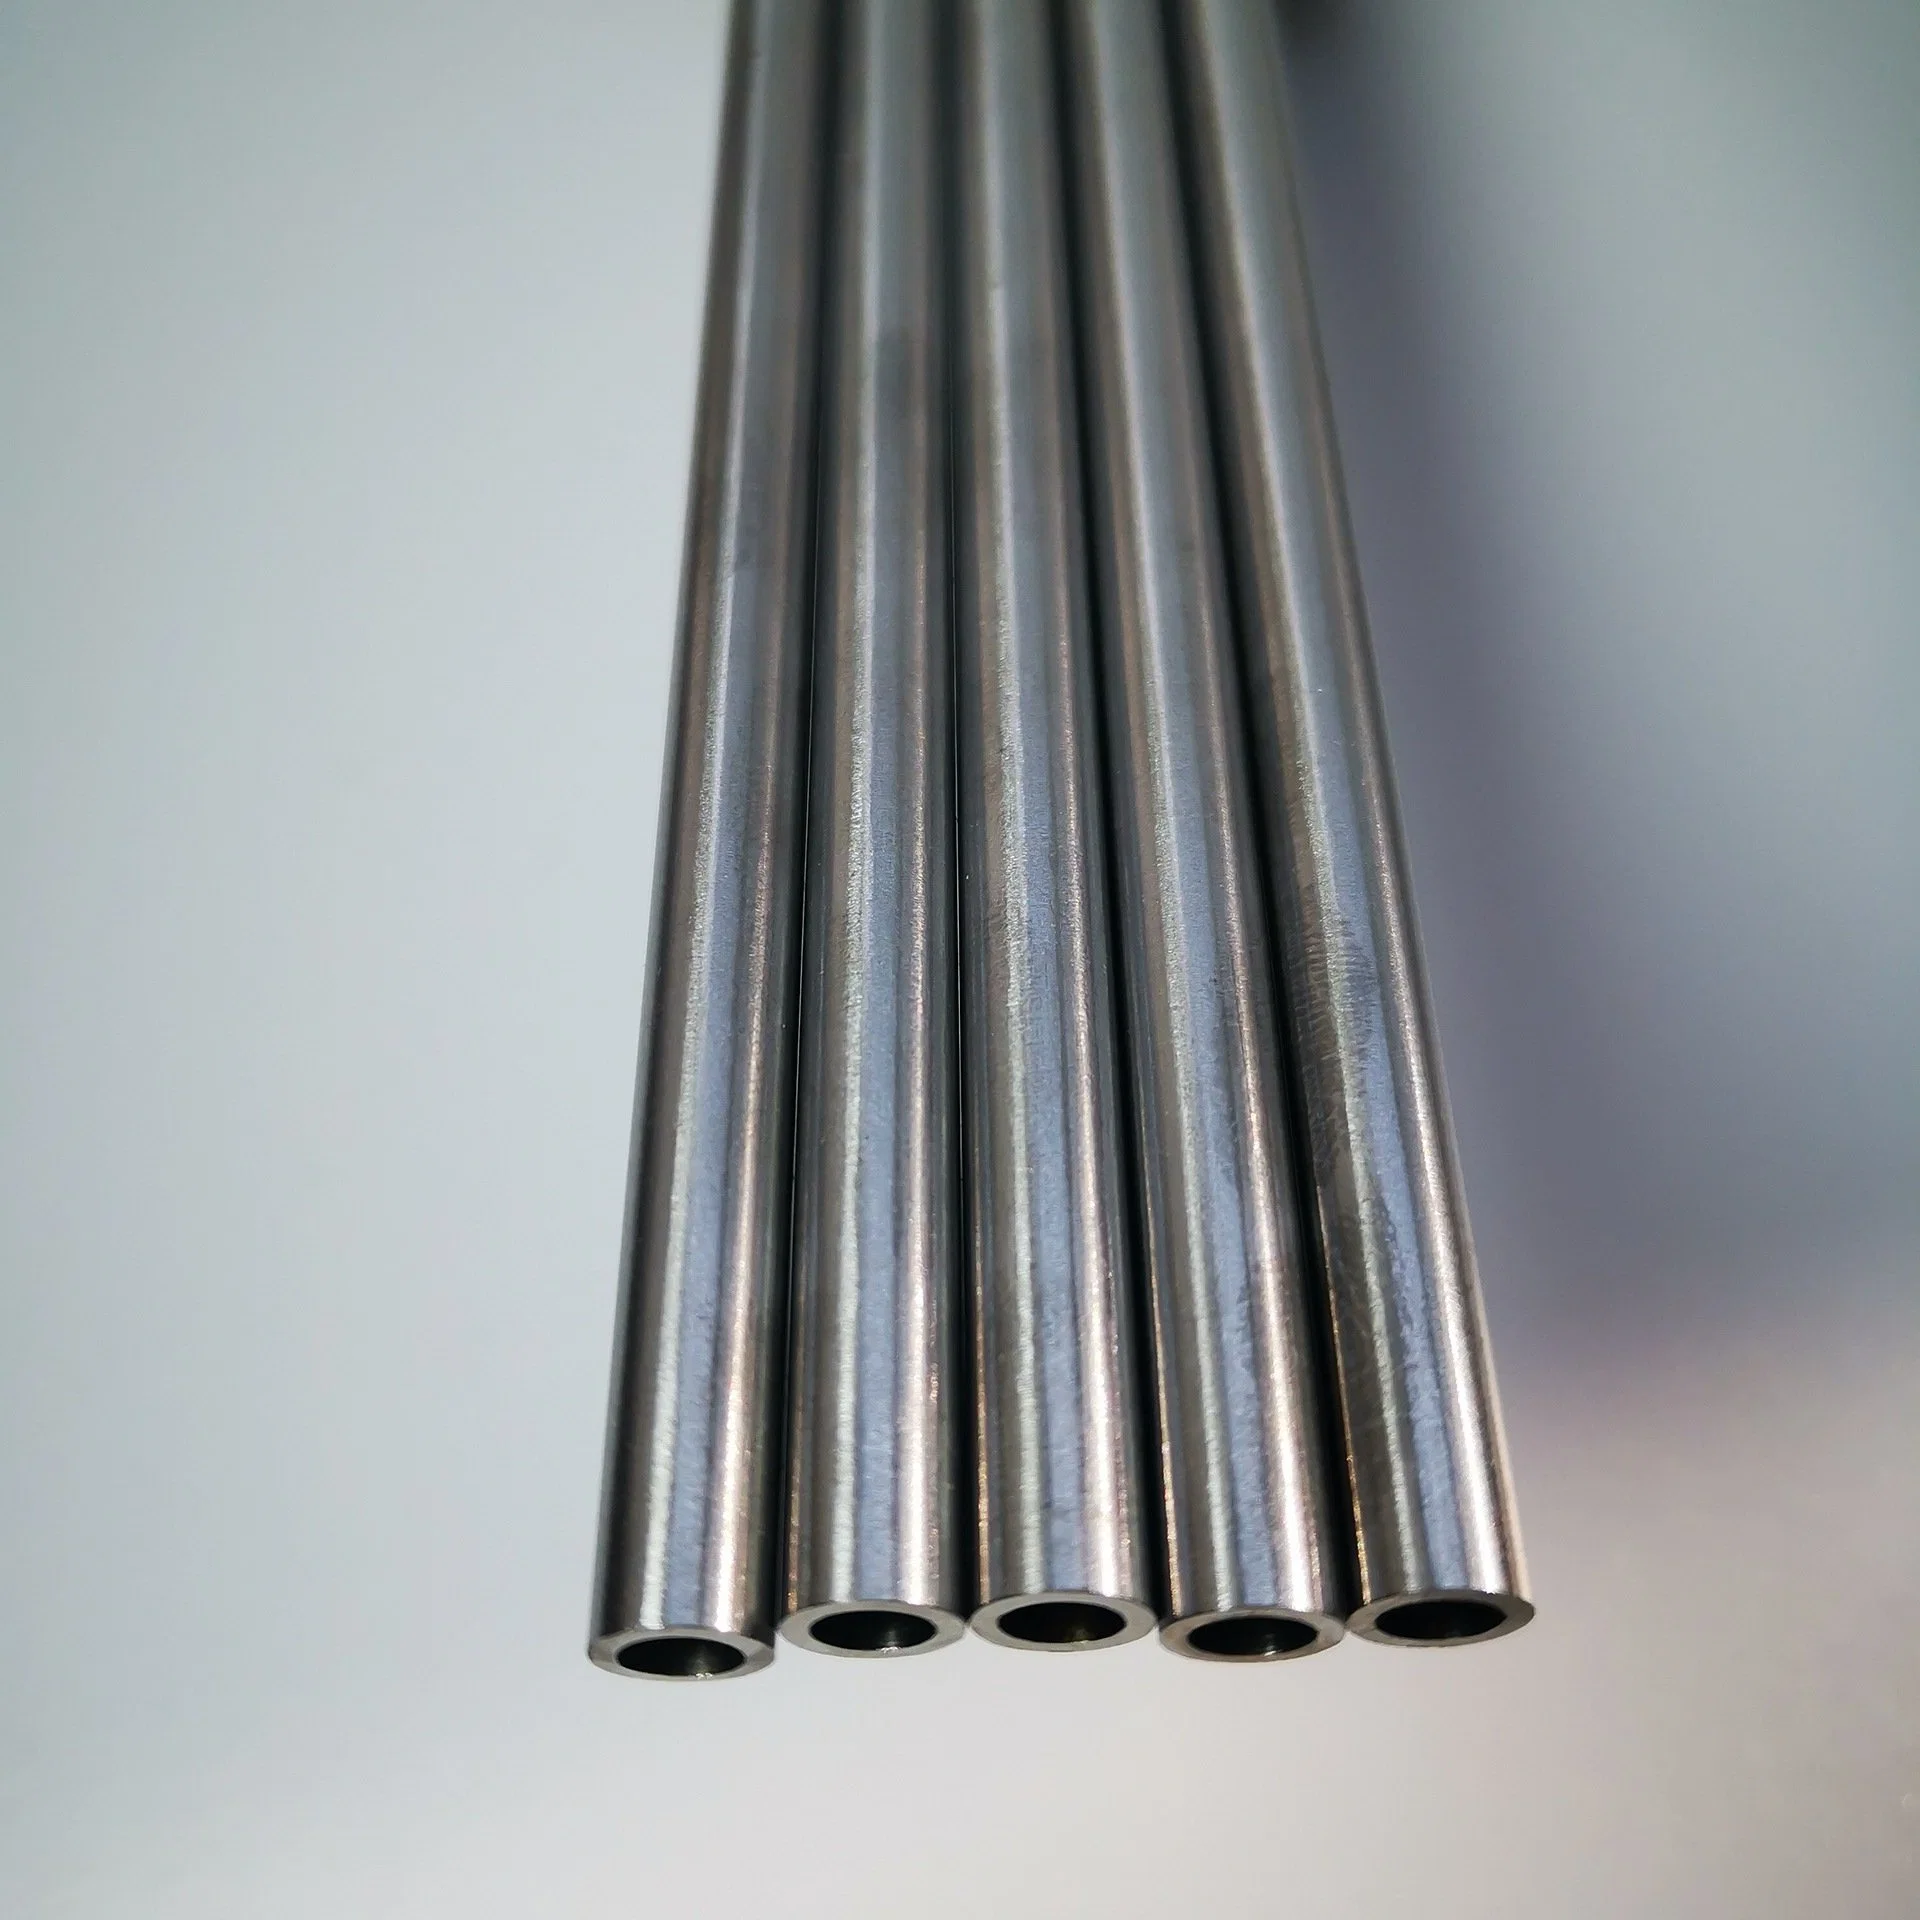 Incoloy825 Inconel 600 Nickel Alloy Seamless Pipe Tube